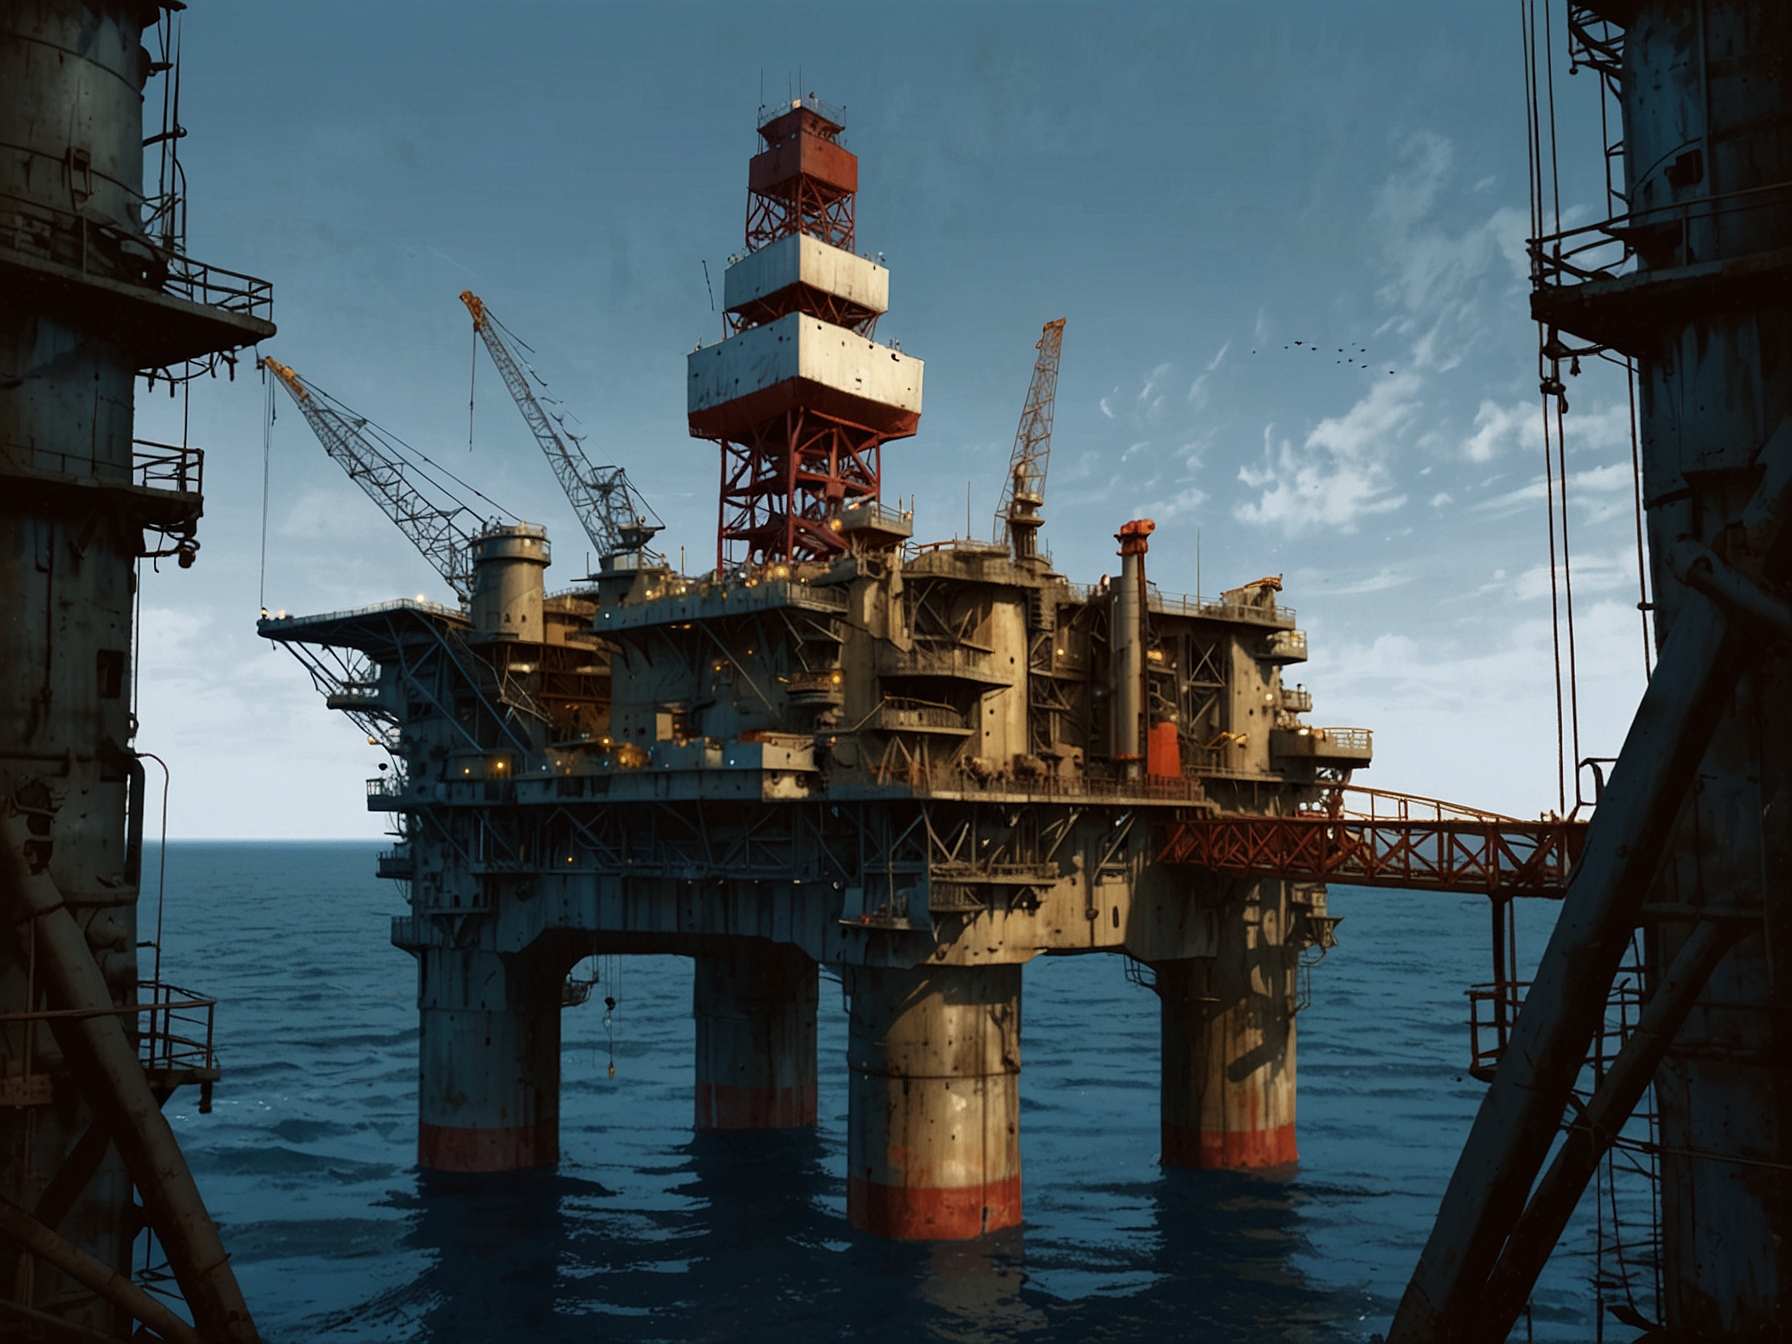 A dynamic offshore drilling platform located in West Africa's deepwater region represents the ongoing efforts and technological advancements in oil exploration and production.